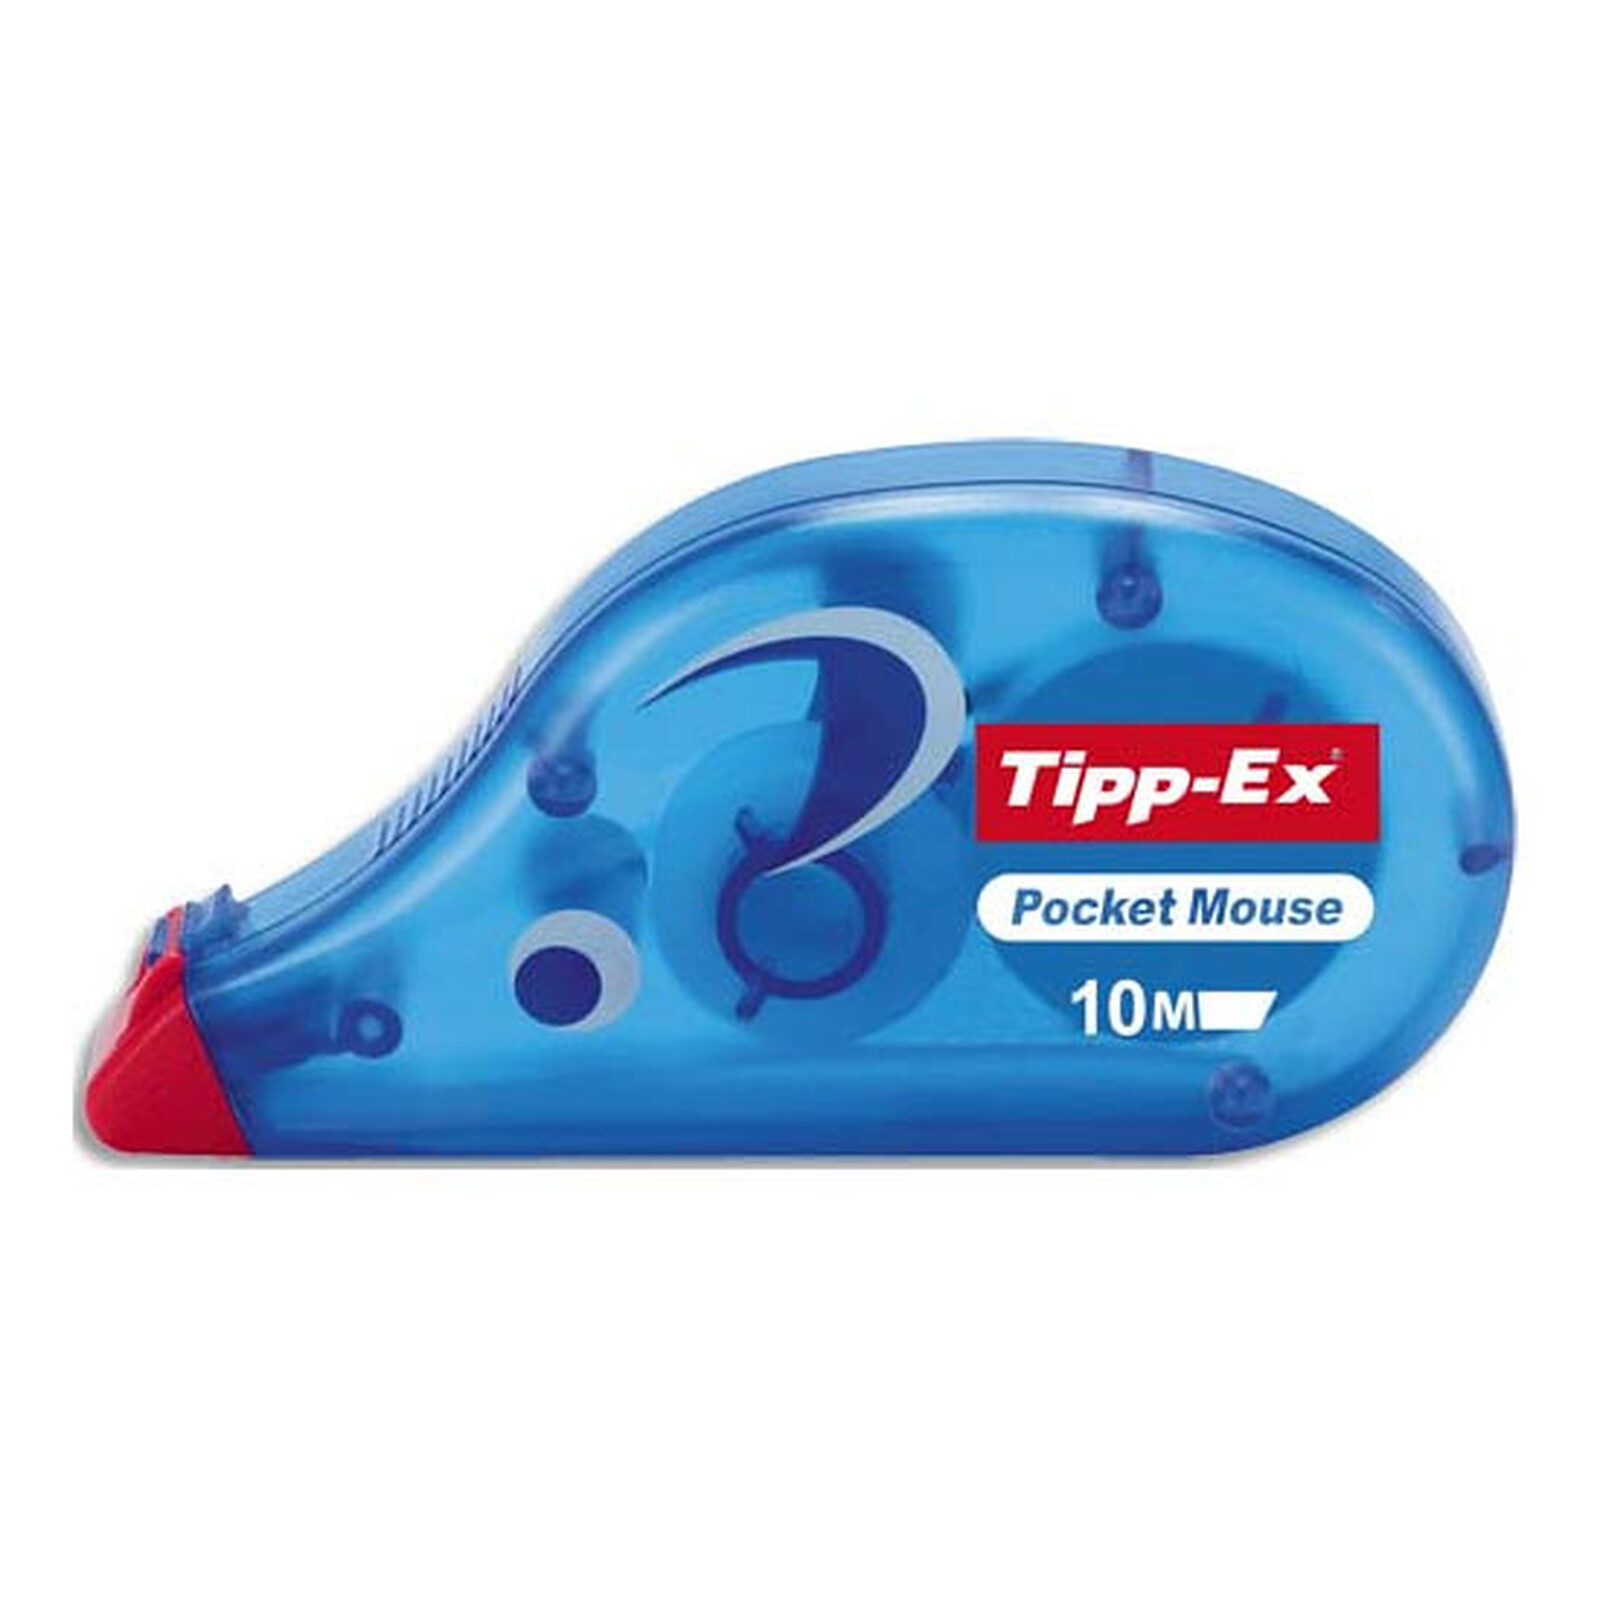 TIPP-EX mouse corrector - 10 meters - Correction on LDLC